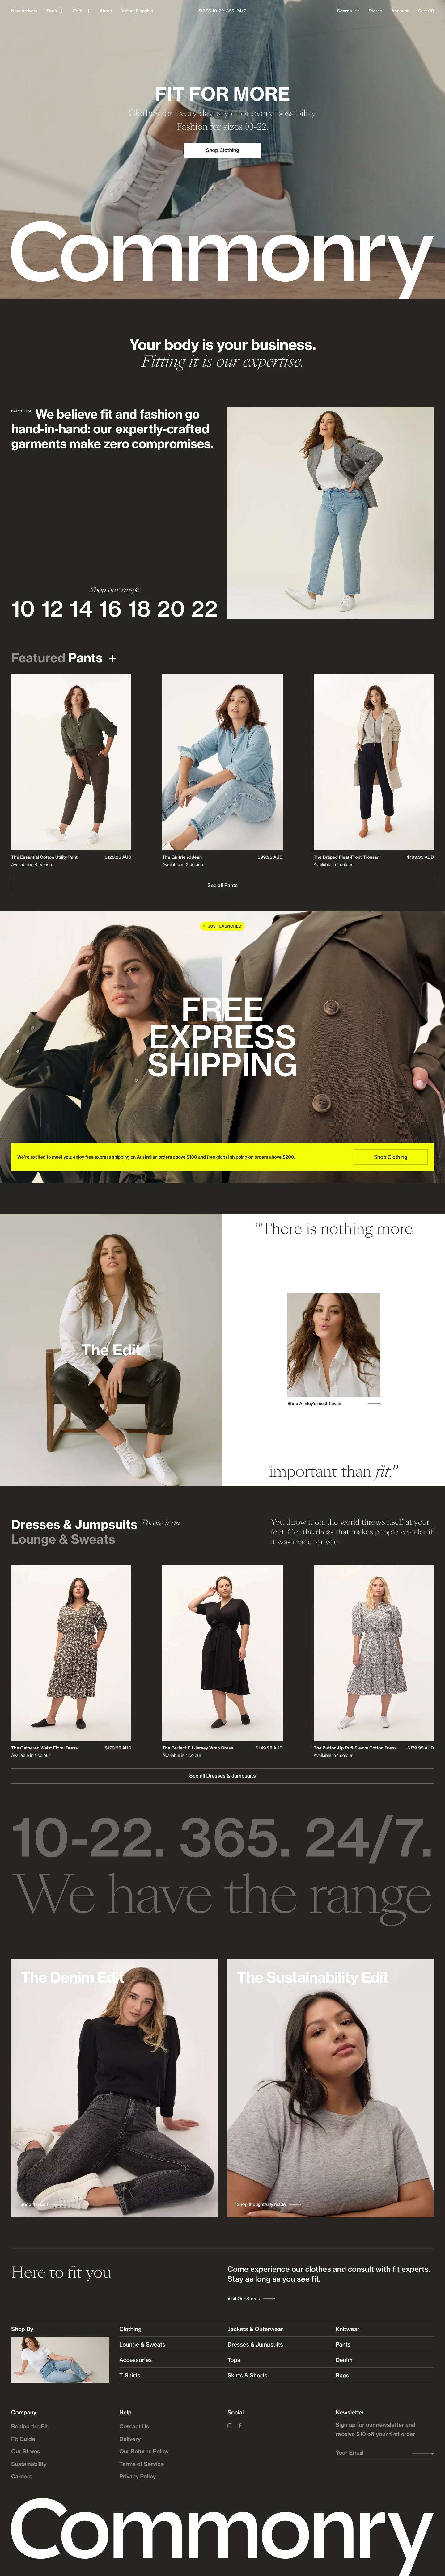 Commonry Landing Page Example: Everyday fashion in sizes 10-22, developed by experts in fit. Clothes for every day, style for every possibility.